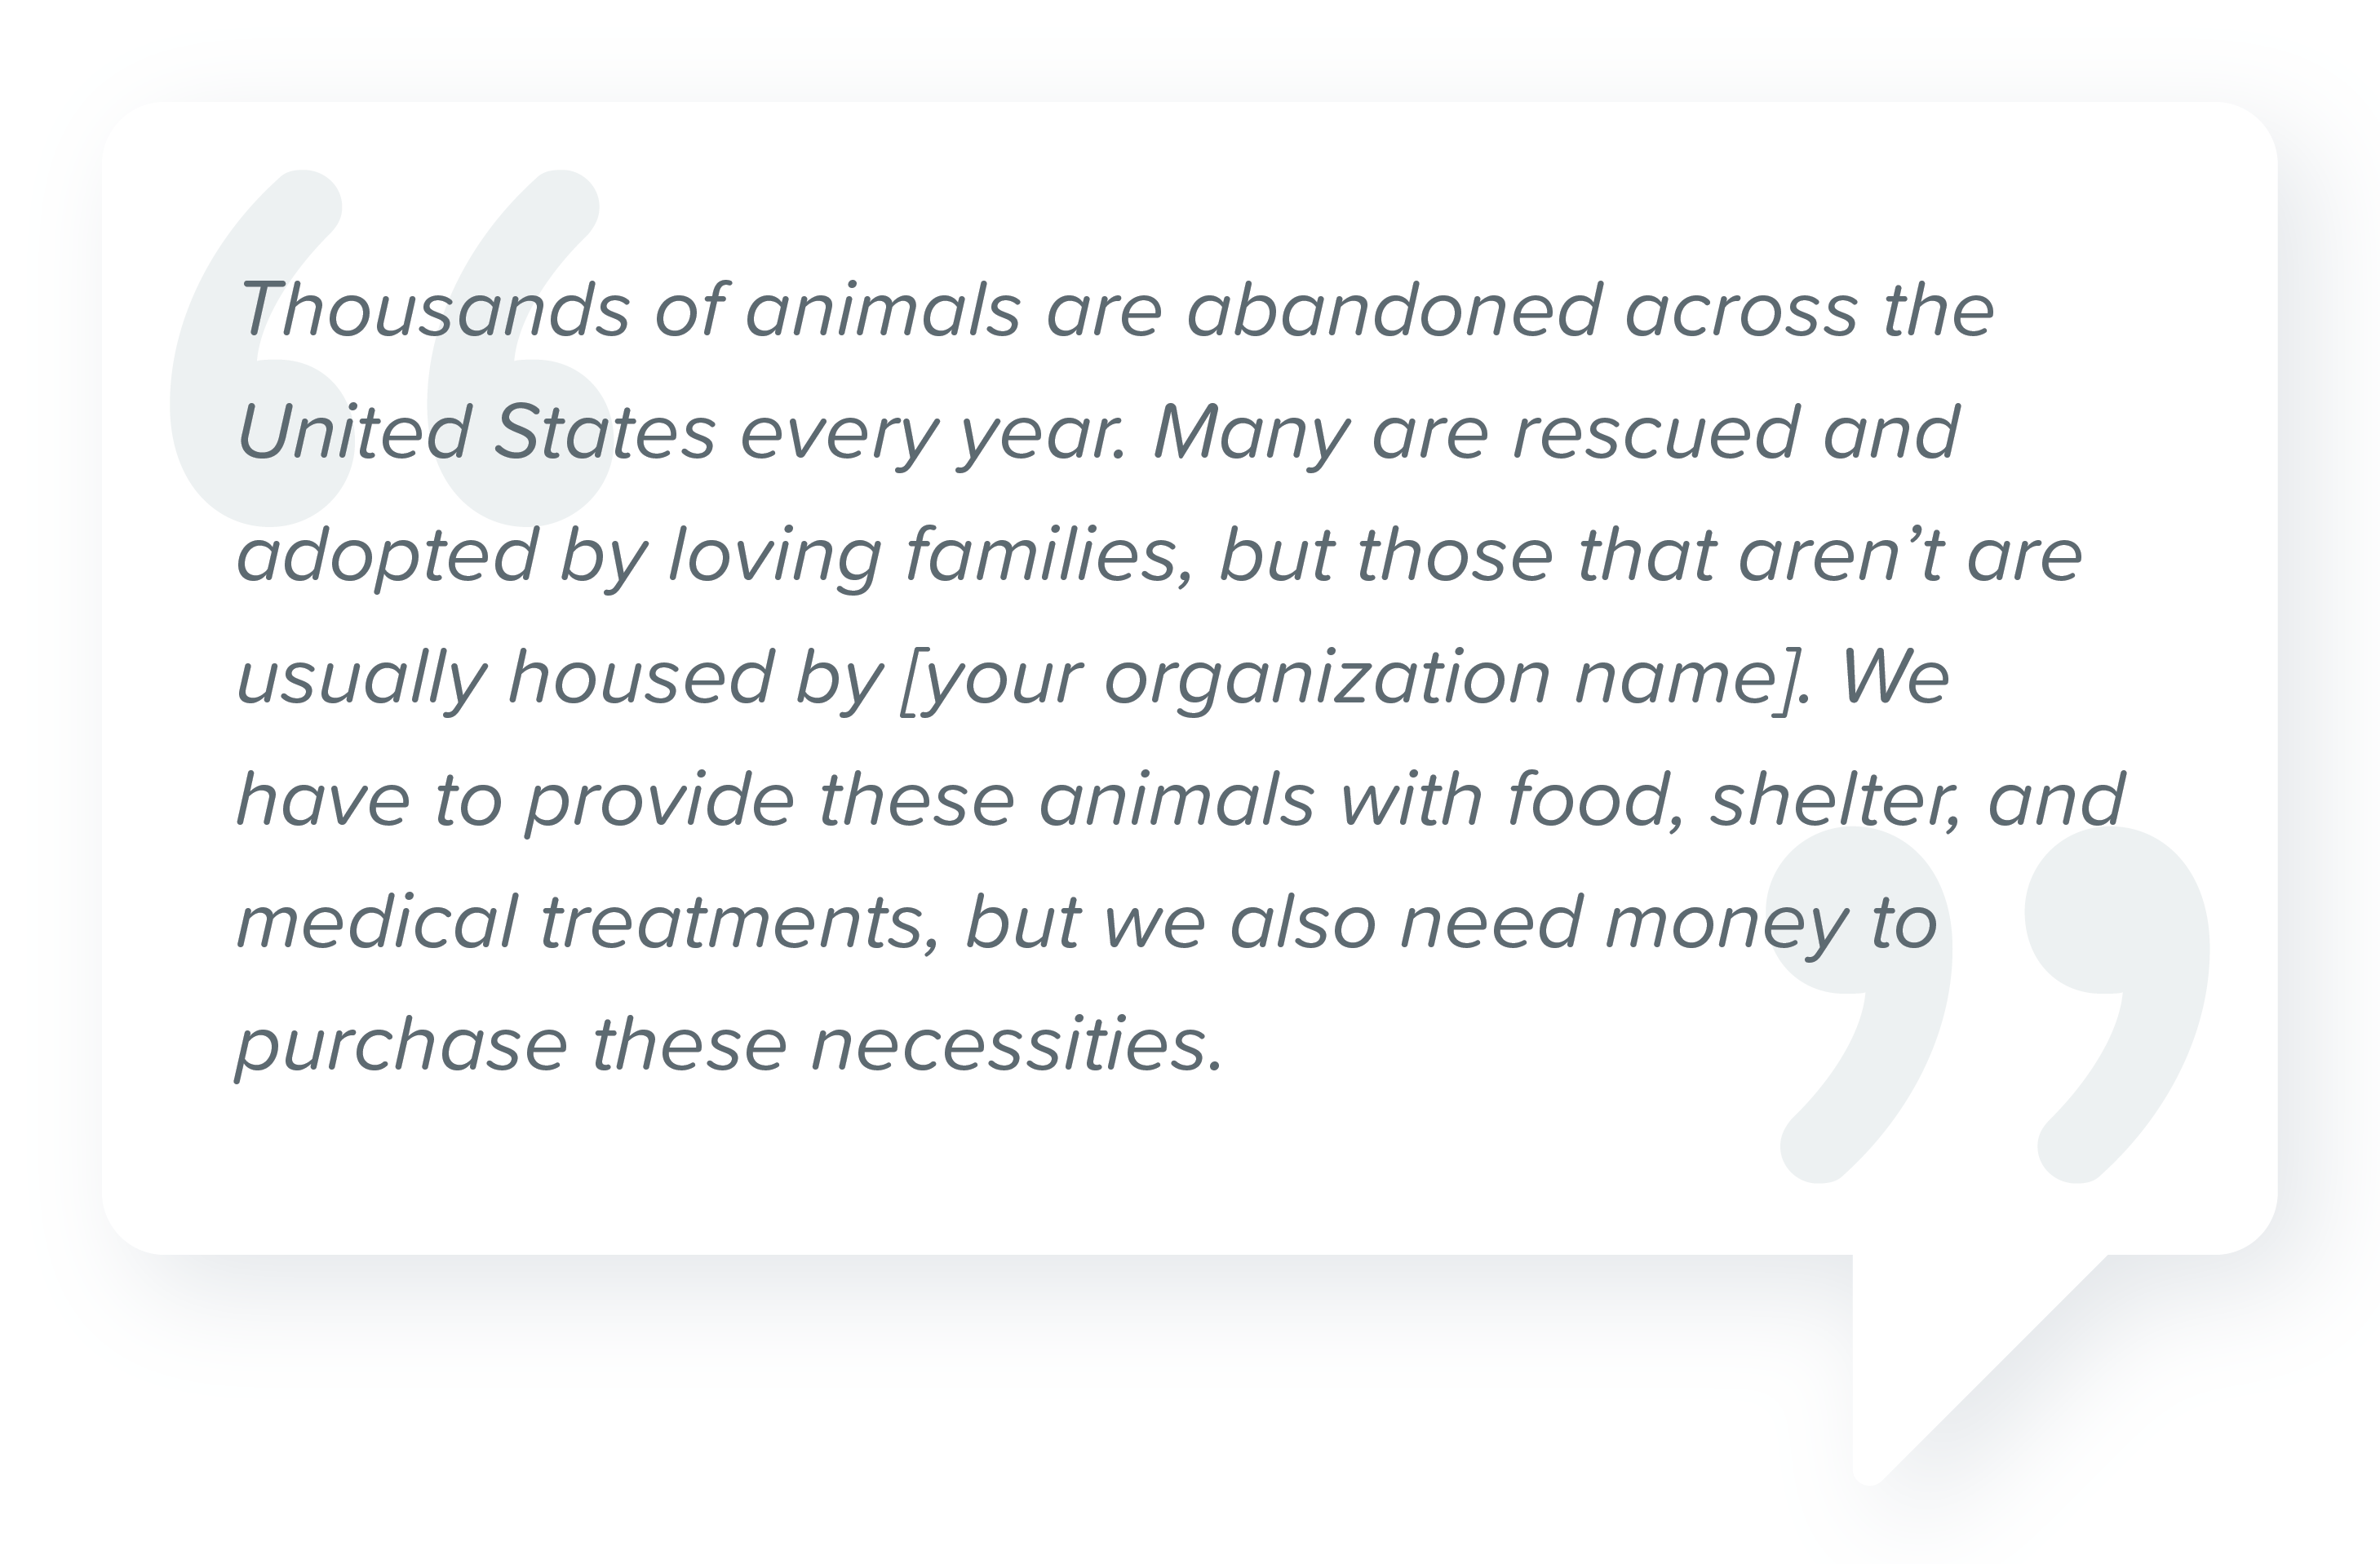 sample script for asking for donations over the phone for an animal rescue with quote: "Thousands of animals are abandoned across the United States every year. Many are rescued and adopted by loving families, but those that aren't are usually housed by [your organization name]. We have to provide these animals with food, shelter, and medical treatments, but we also need money to purchase these necessities."